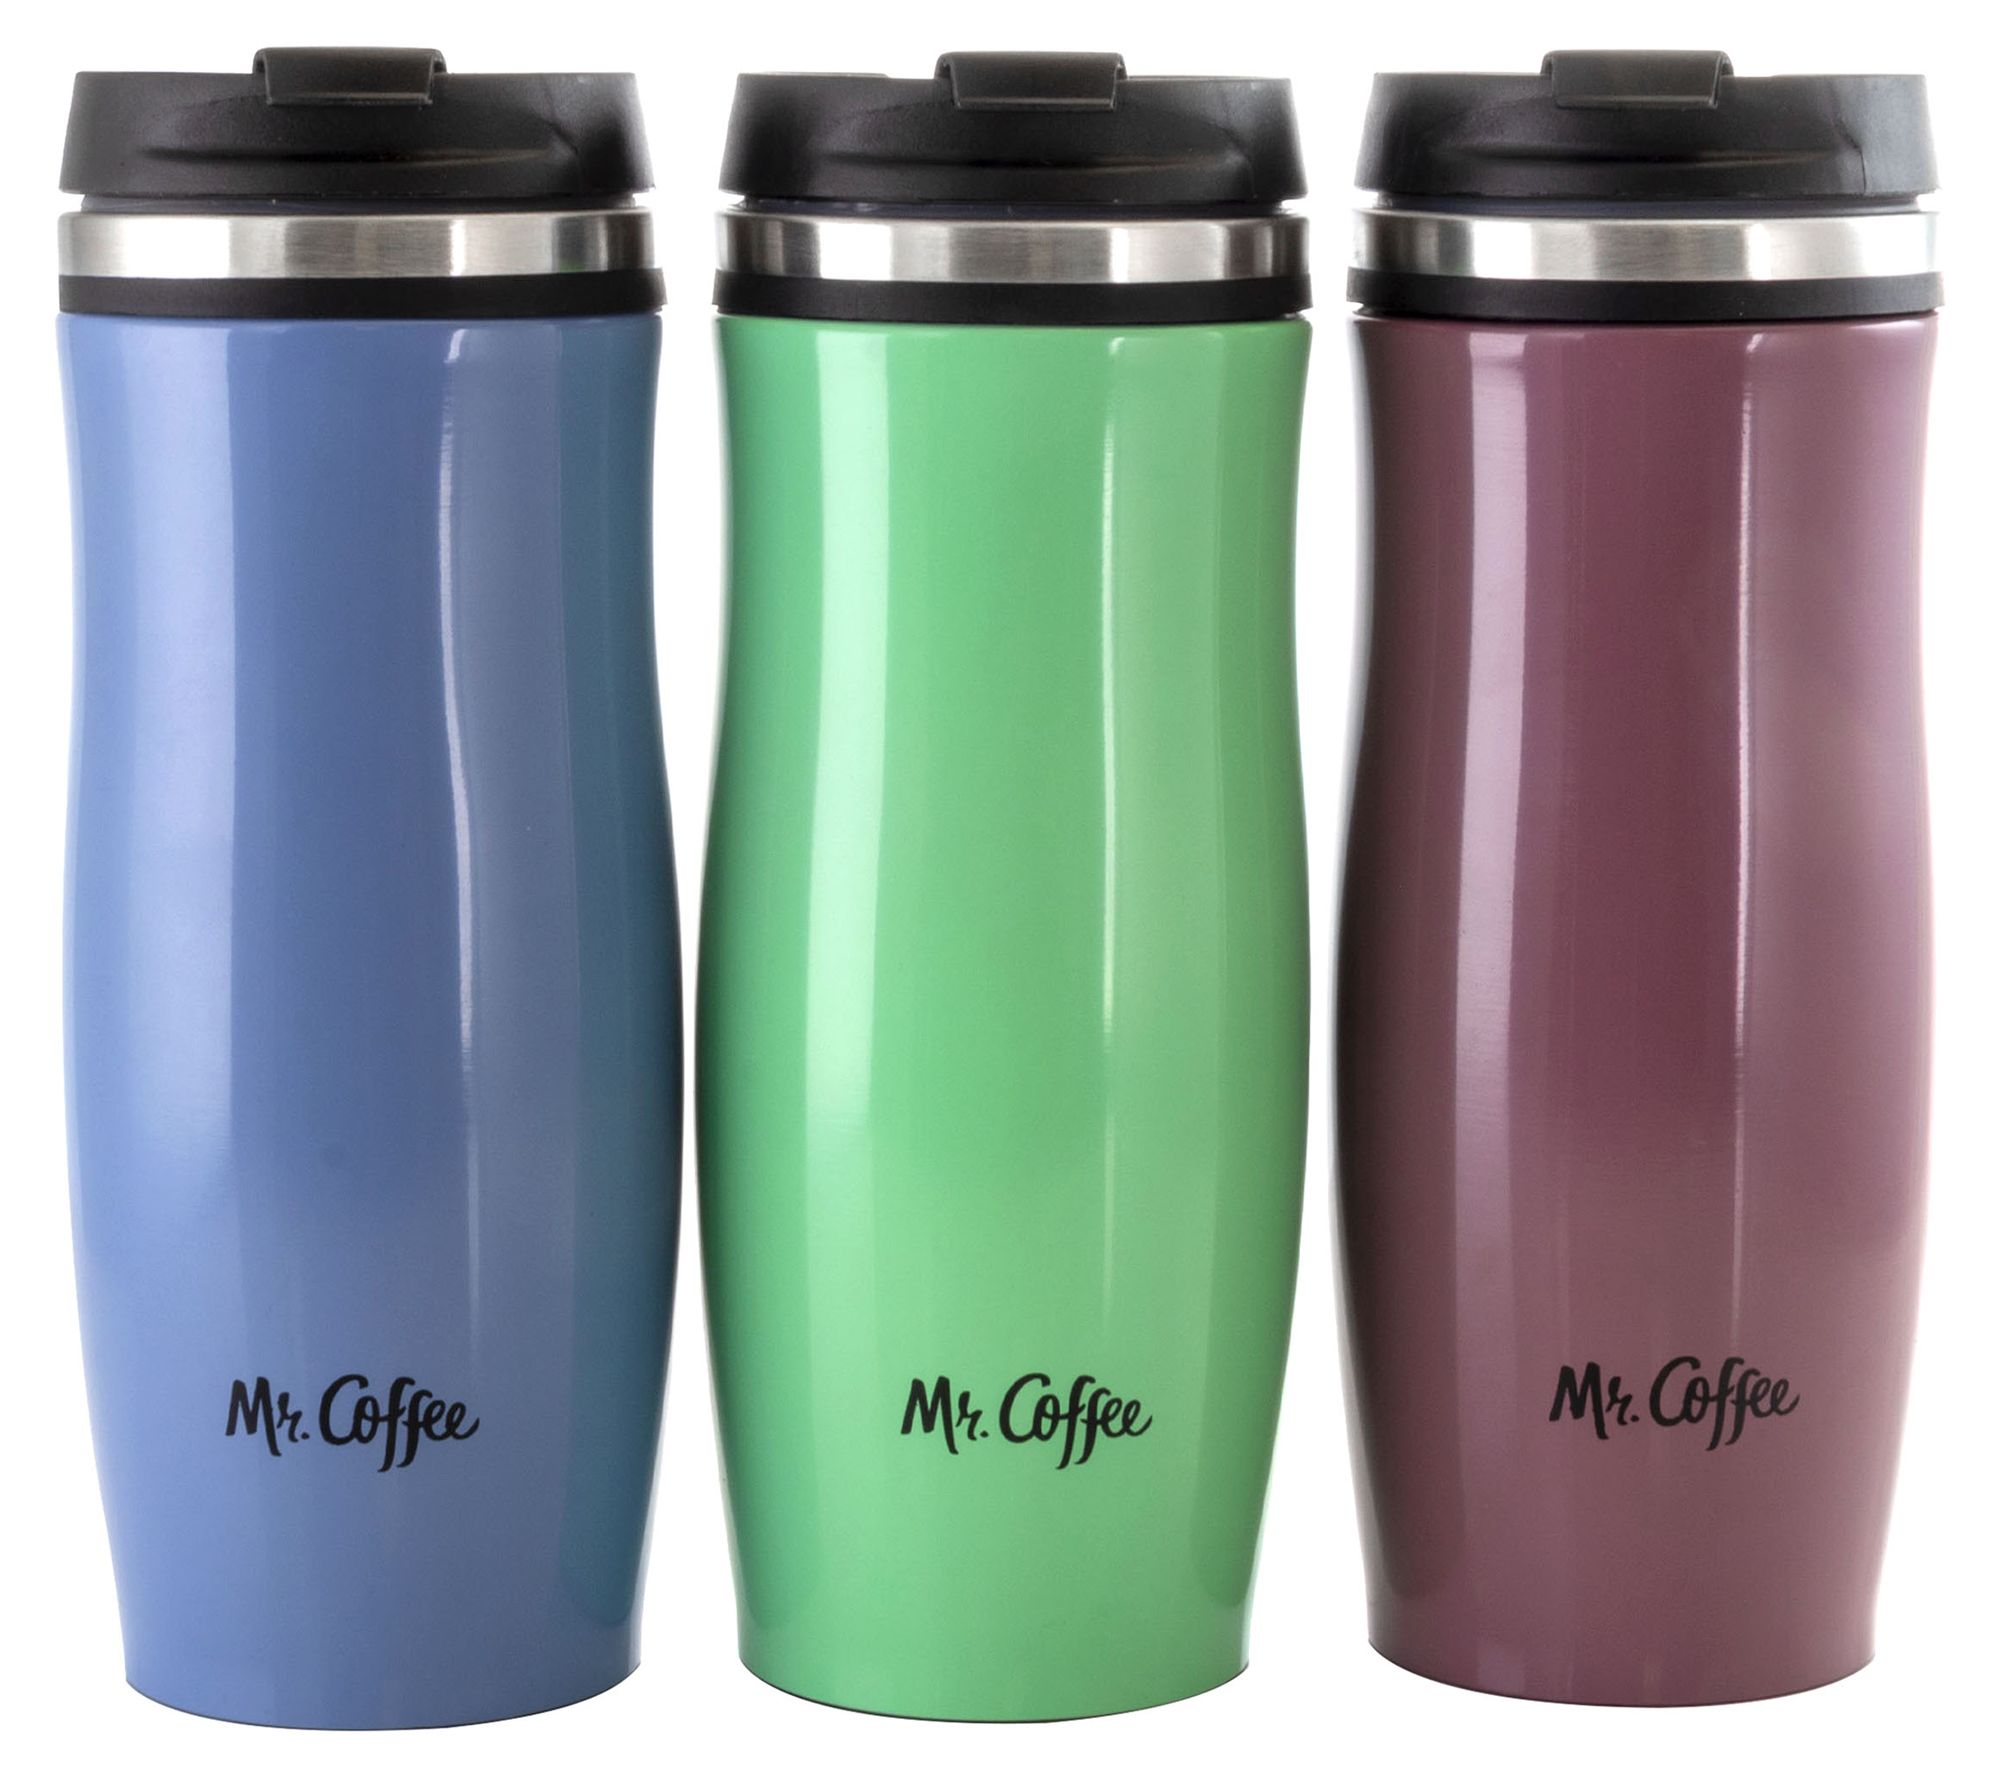 THERMOS Stainless King Vacuum-Insulated Travel Mug, 16 Ounce, Matte Steel